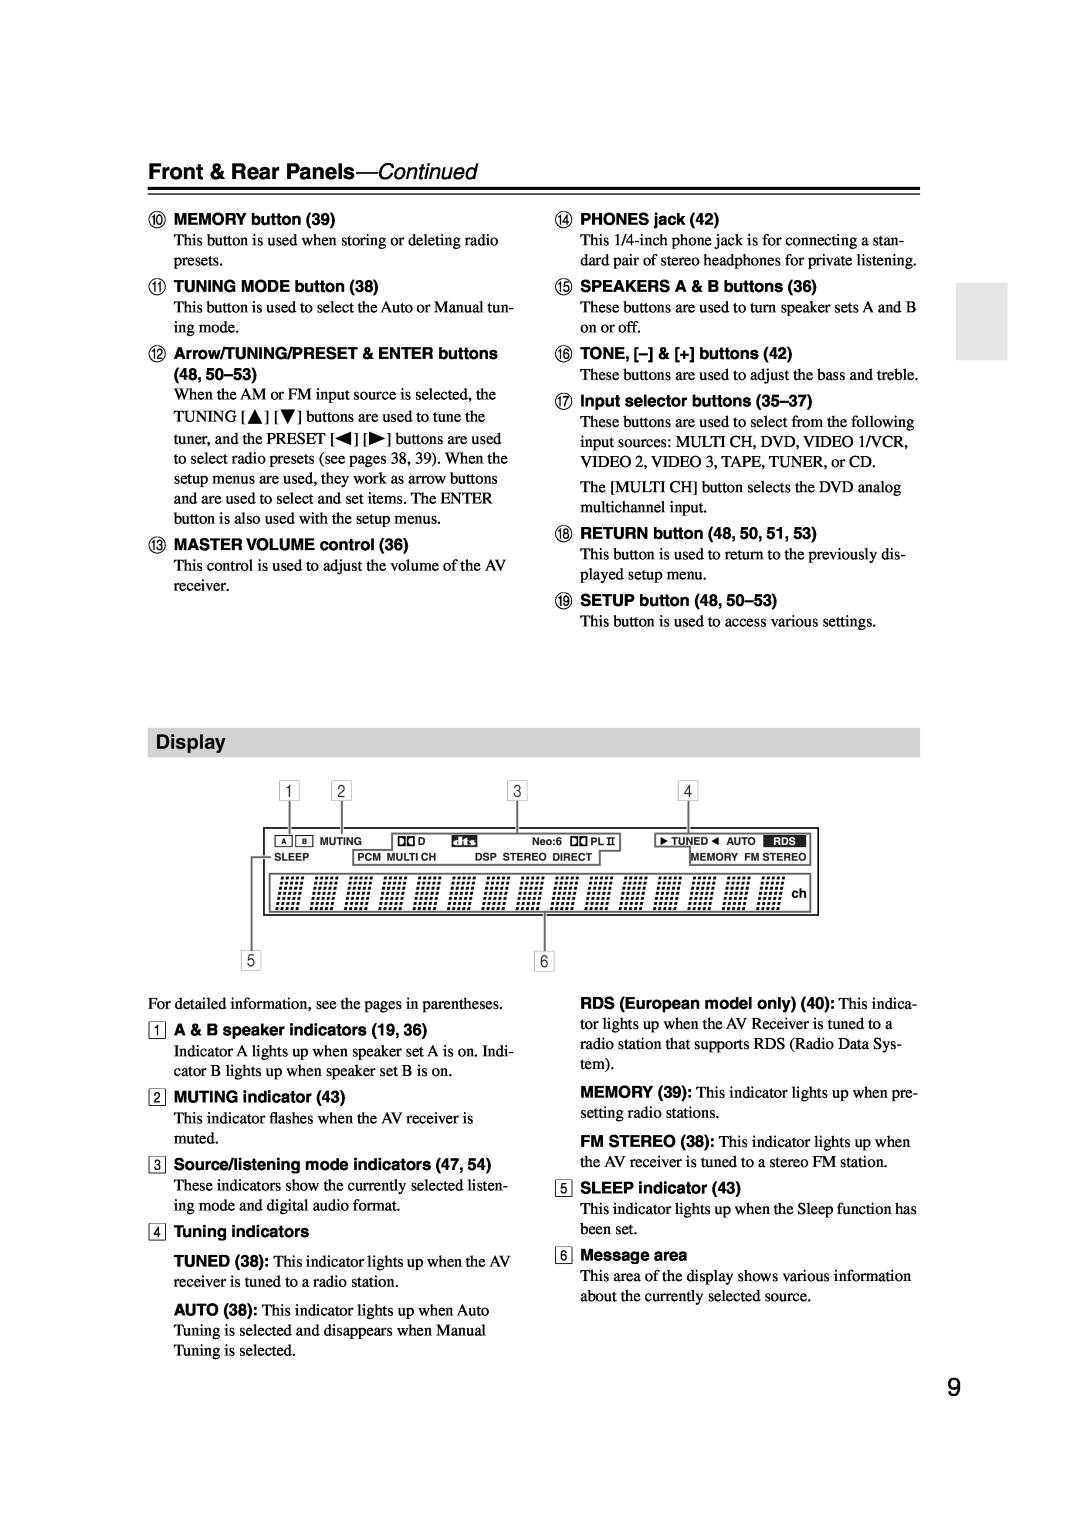 Onkyo HT-S590 instruction manual Front & Rear Panels-Continued, Display 